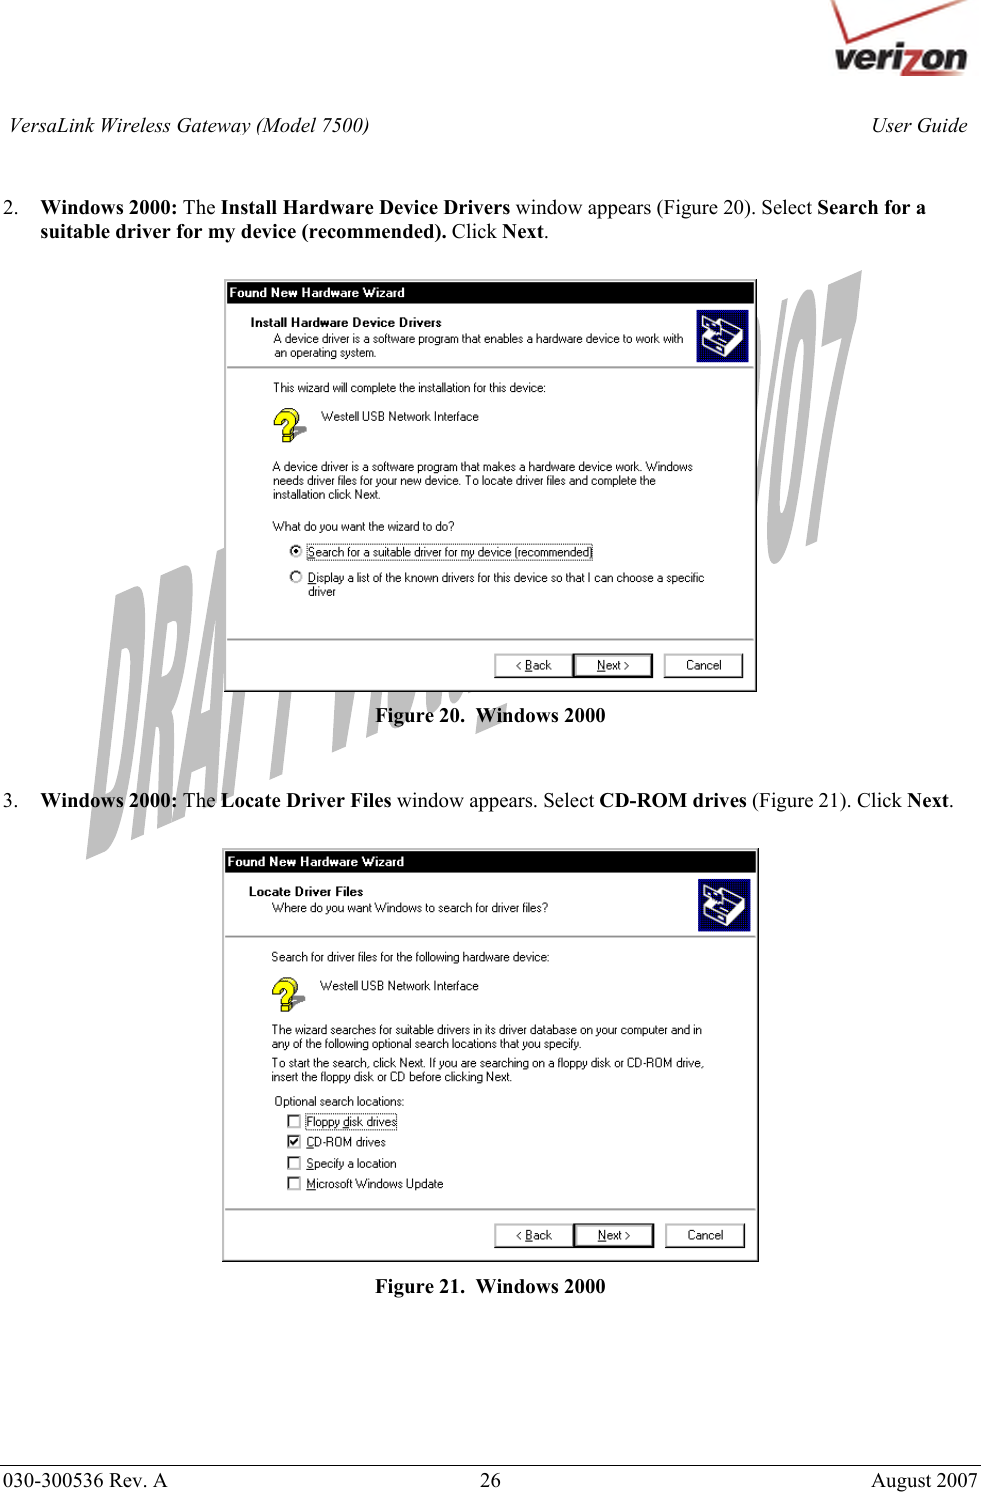       030-300536 Rev. A  26       August 2007 User GuideVersaLink Wireless Gateway (Model 7500)  2. Windows 2000: The Install Hardware Device Drivers window appears (Figure 20). Select Search for a suitable driver for my device (recommended). Click Next.   Figure 20.  Windows 2000   3. Windows 2000: The Locate Driver Files window appears. Select CD-ROM drives (Figure 21). Click Next.   Figure 21.  Windows 2000       